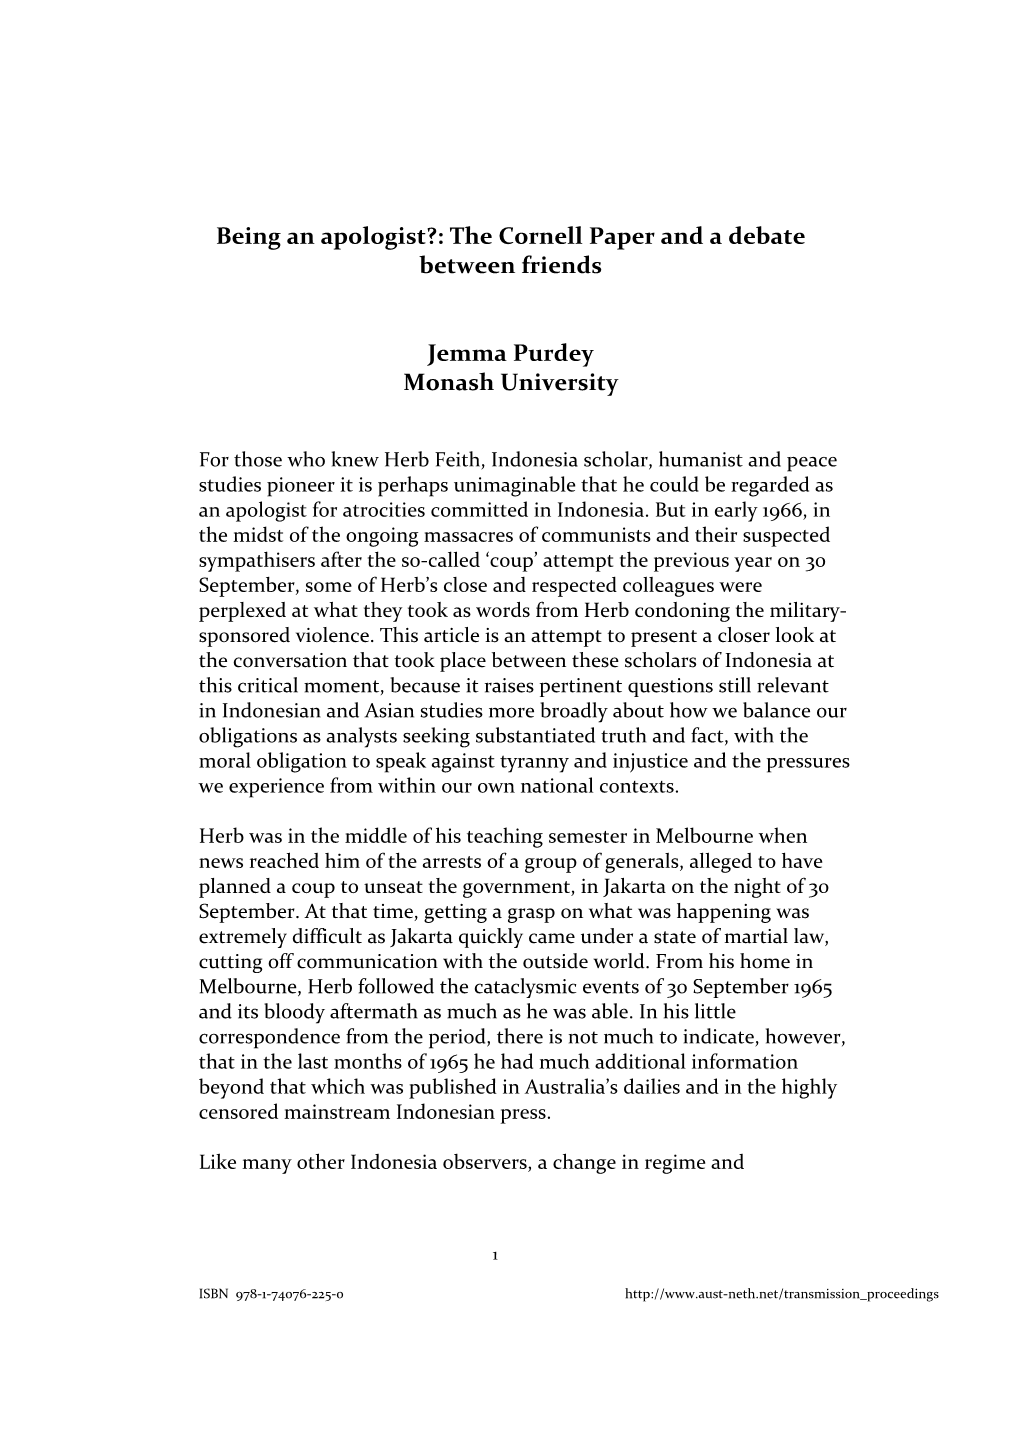 Being an Apologist?: the Cornell Paper and a Debate Between Friends